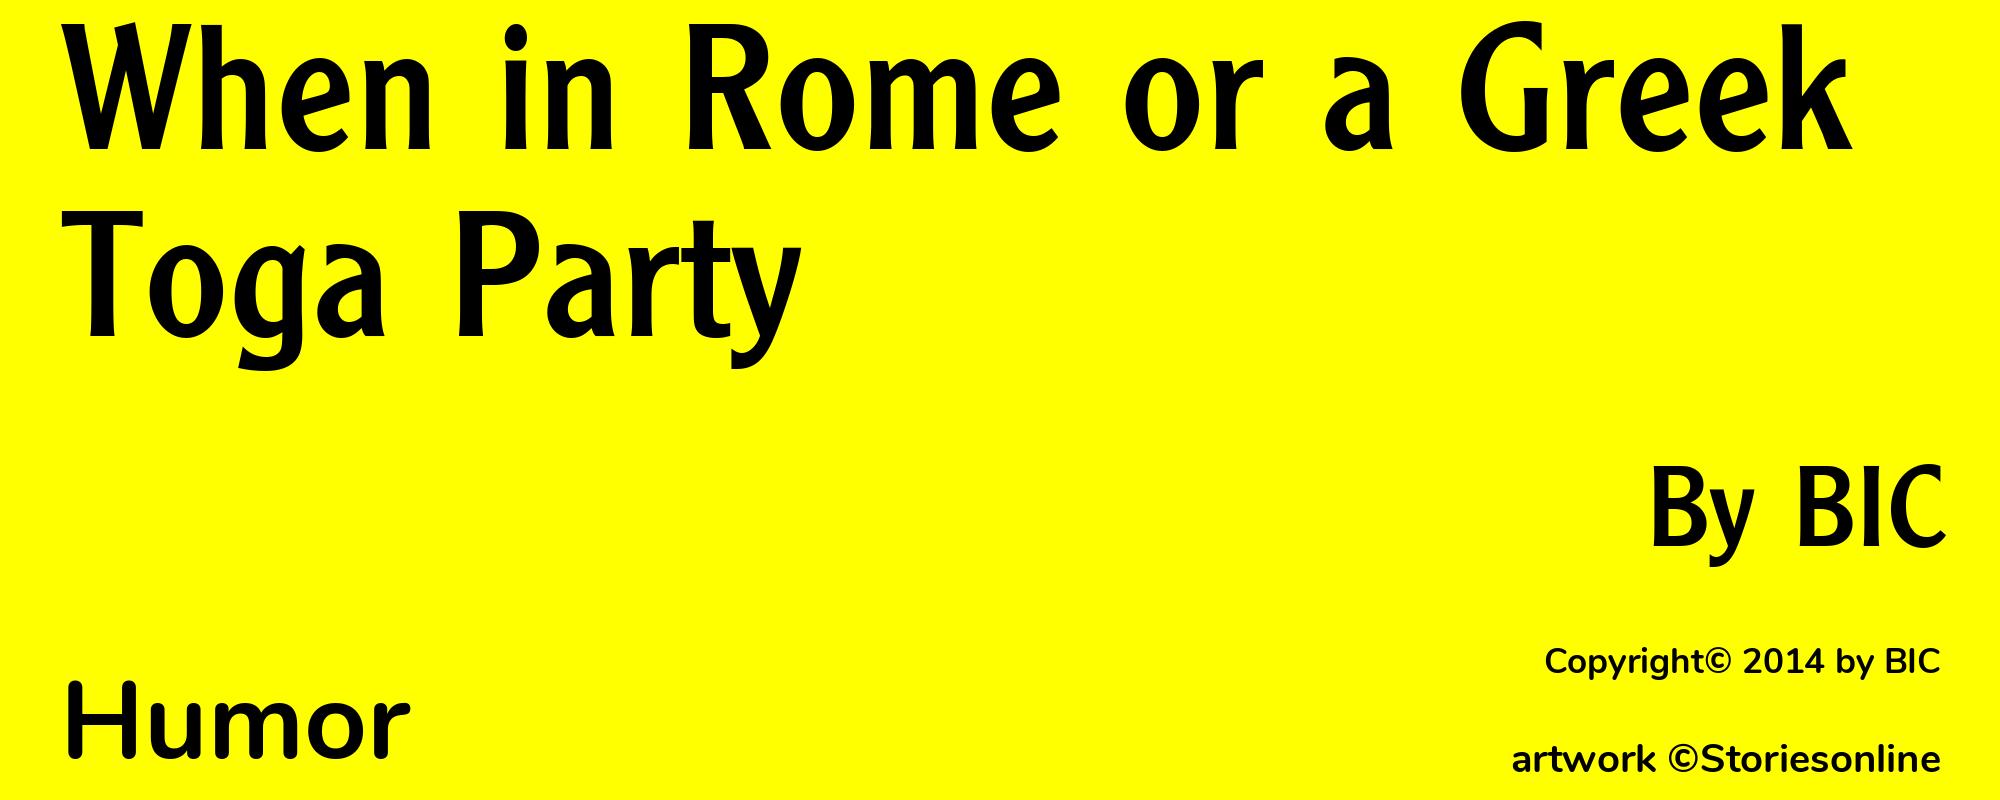 When in Rome or a Greek Toga Party - Cover